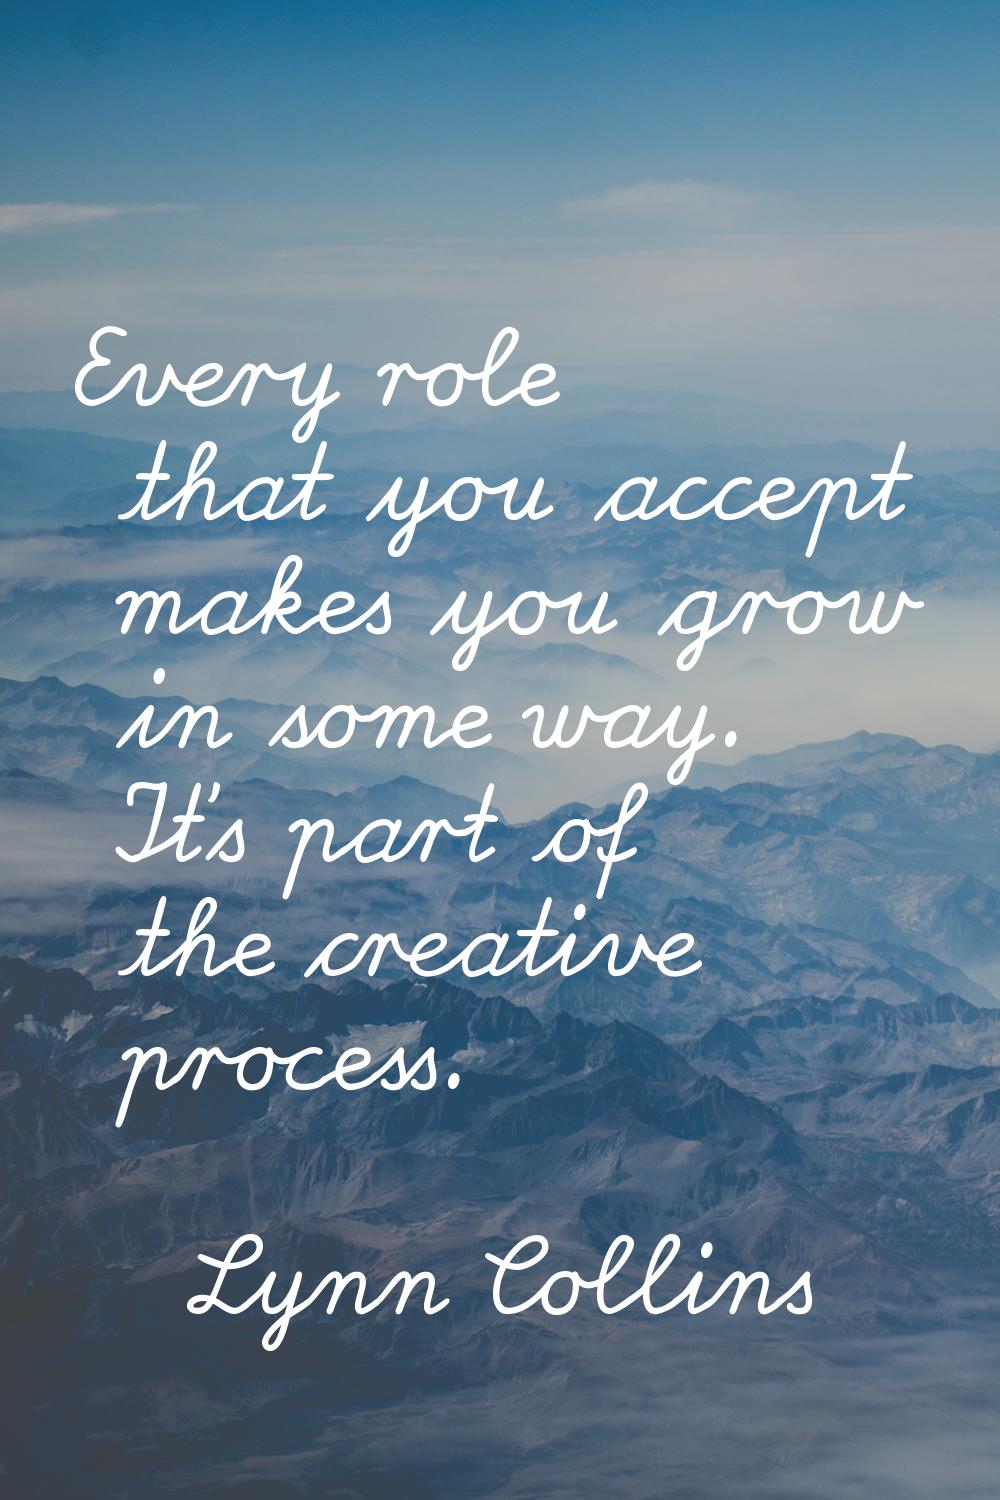 Every role that you accept makes you grow in some way. It's part of the creative process.